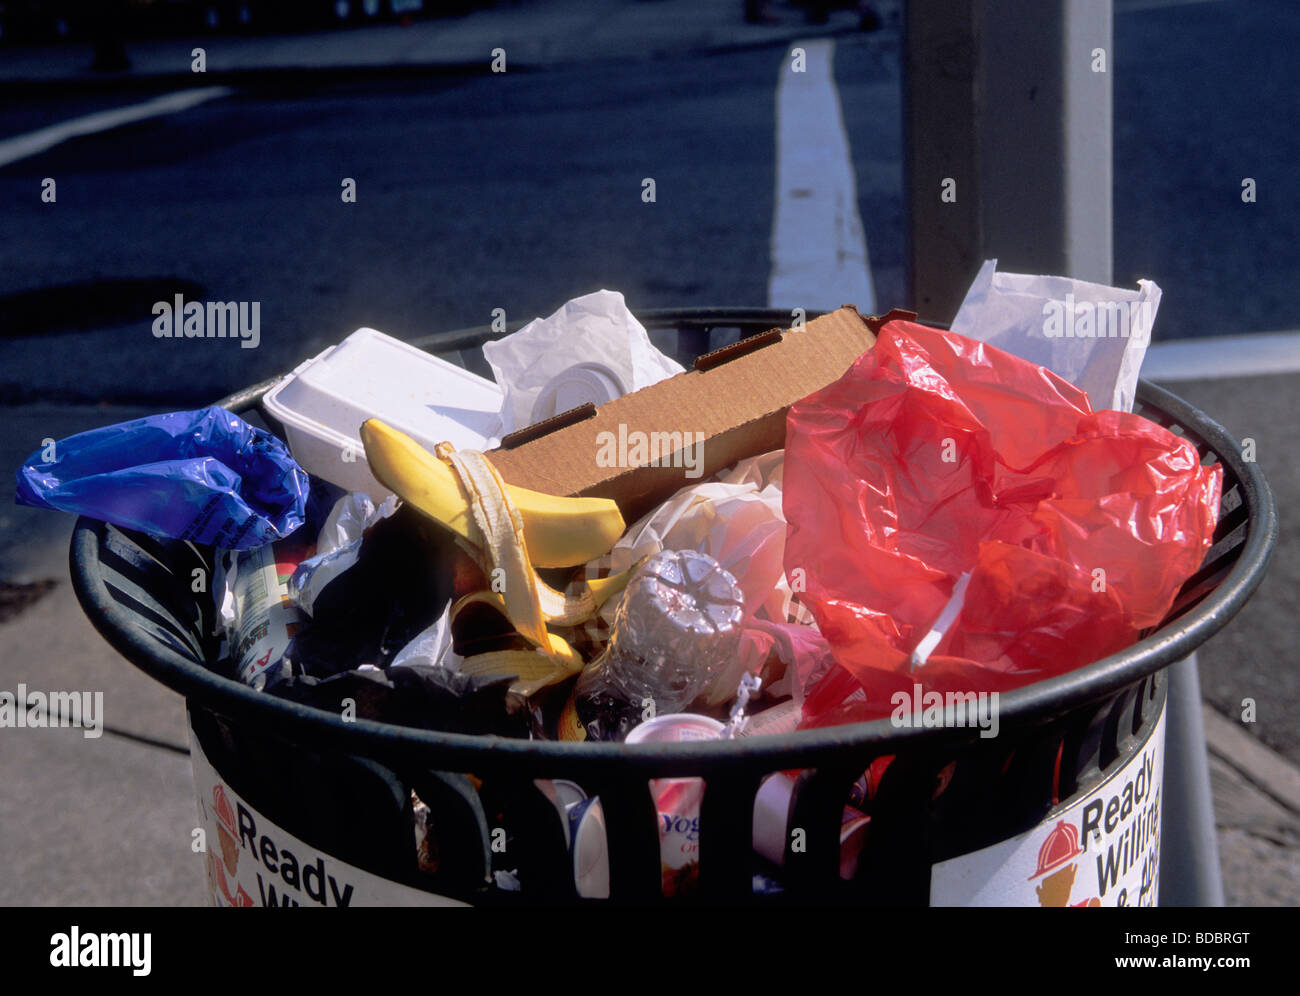 Street trash in trashcan close up. Overflowing garbage bin with recyclable plastic bags and plastic bottles. Stock Photo